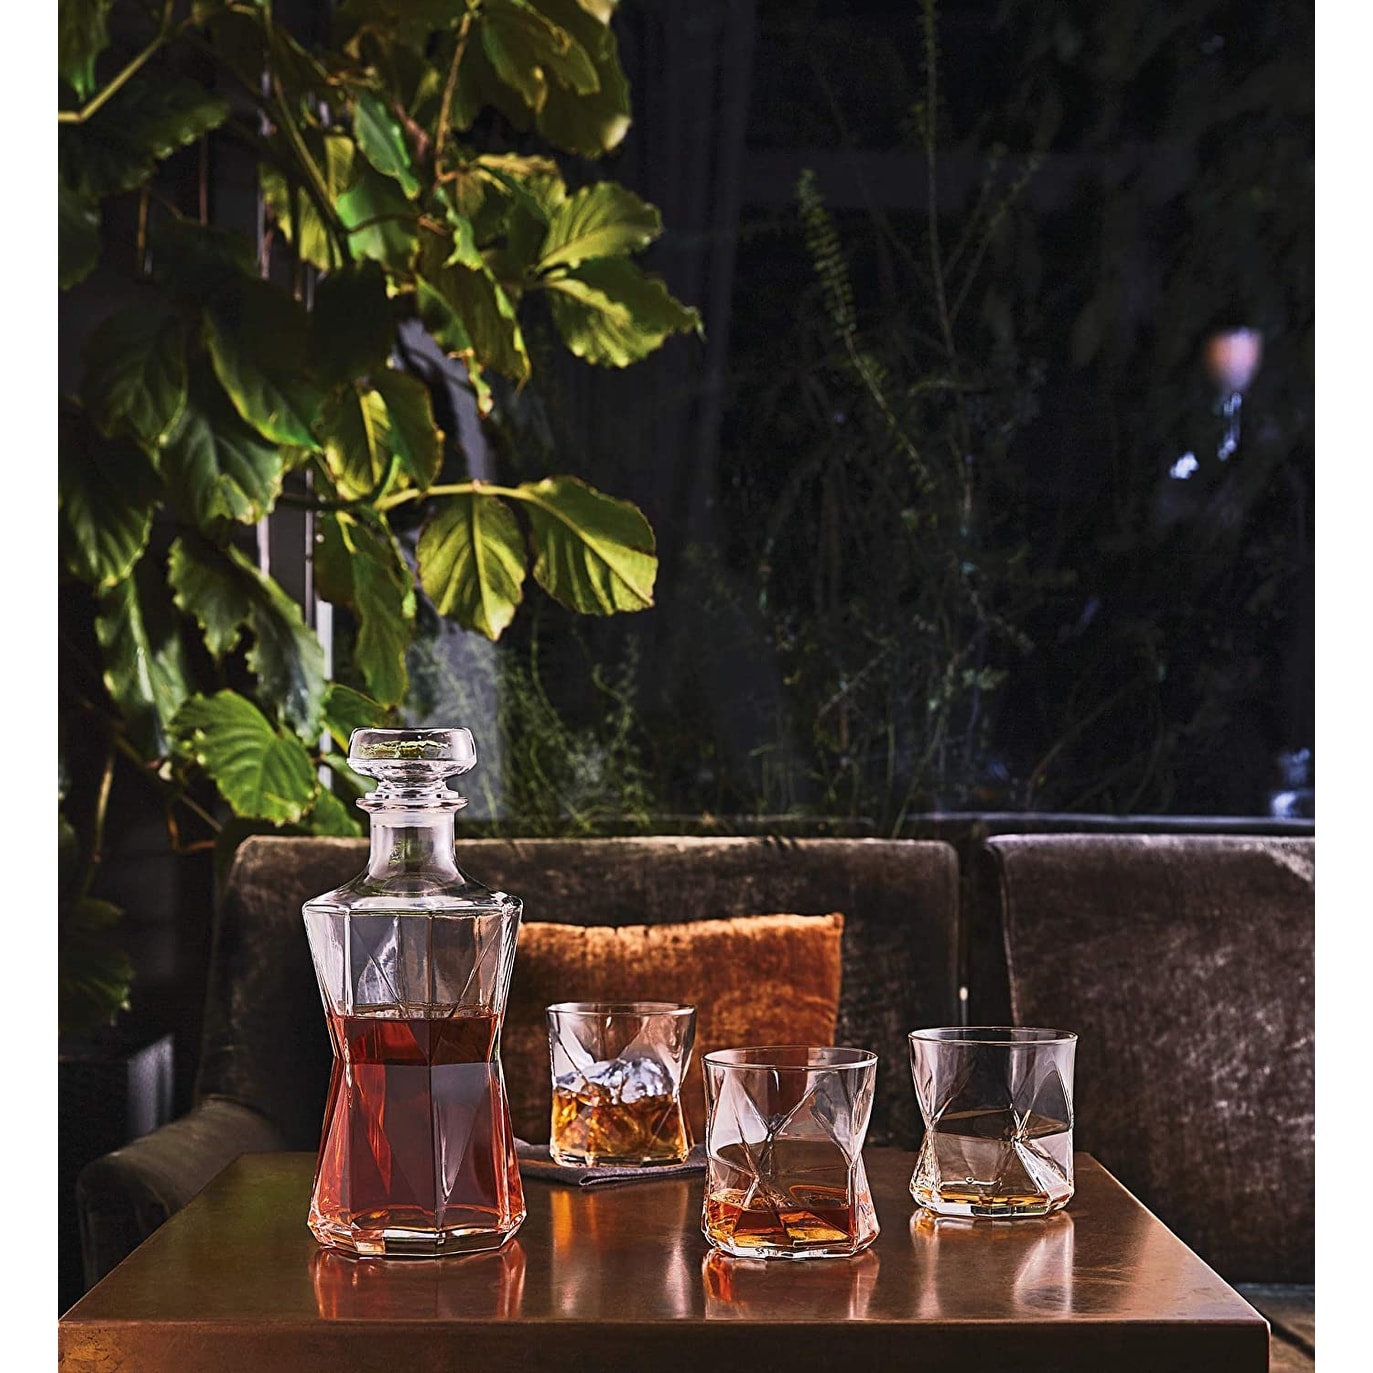 https://ak1.ostkcdn.com/images/products/is/images/direct/f1da0c2b316aa2e868c263b103e114f5ea977858/Bormioli-Rocco-Cassiopea-7Pc-Whiskey-Set-%281-Decanter-6-Rocks-Glasses%29.jpg